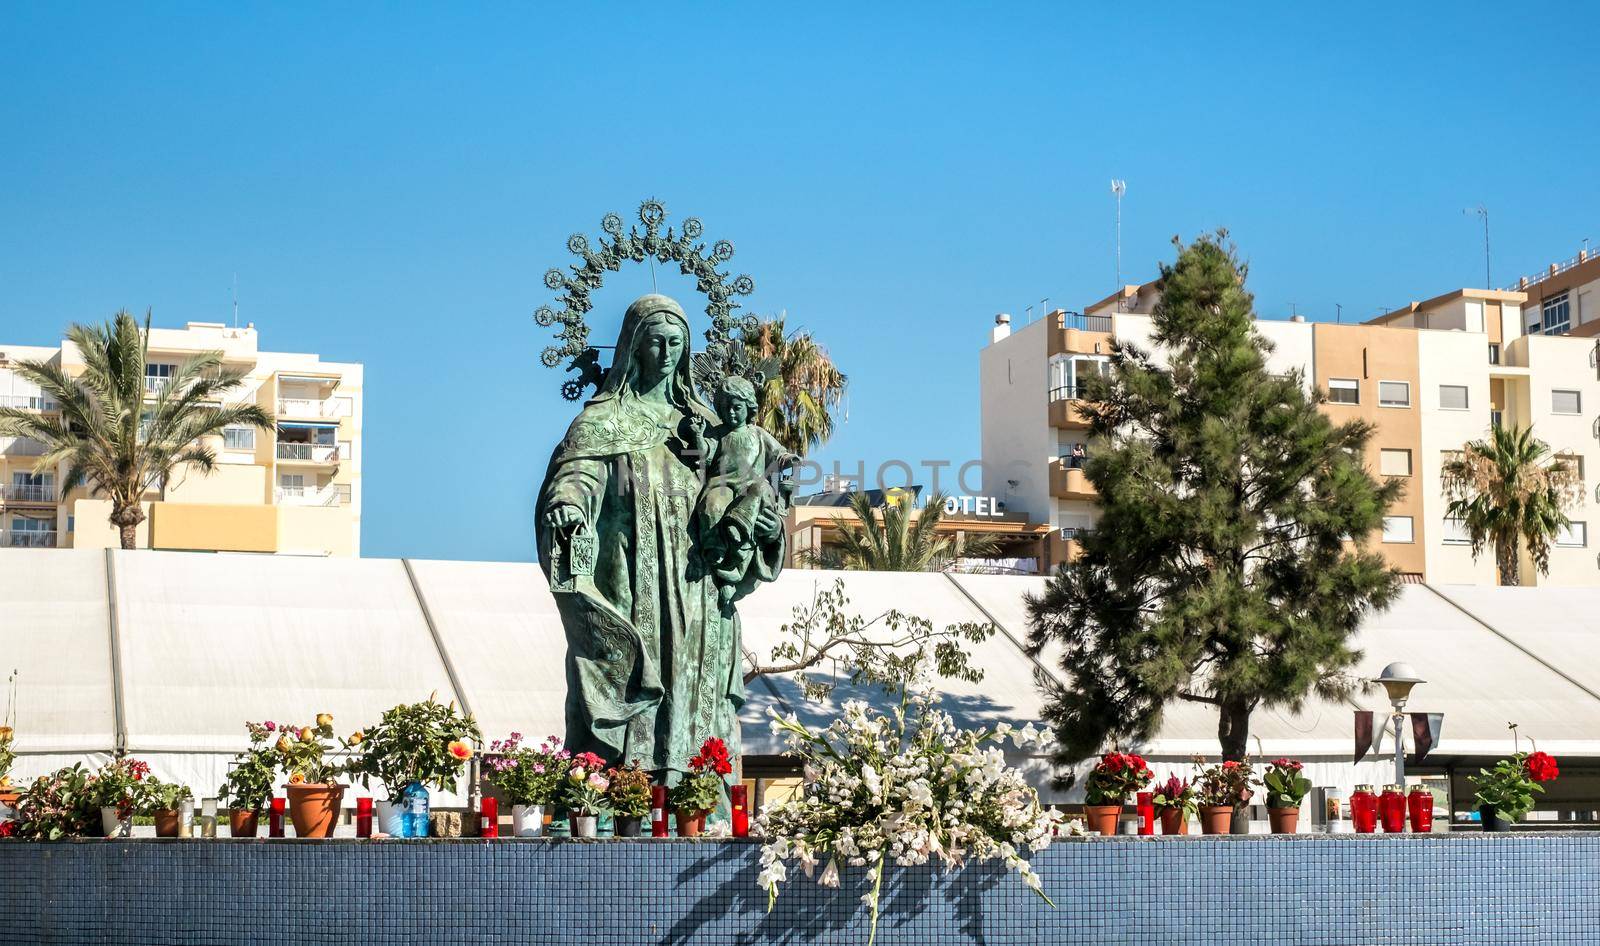 Torre del Mar, Spain - July 29, 2018 statue of Our Lady of Carmen with candles on the edge in center of Tore del Mar city, Malaga region, Spain